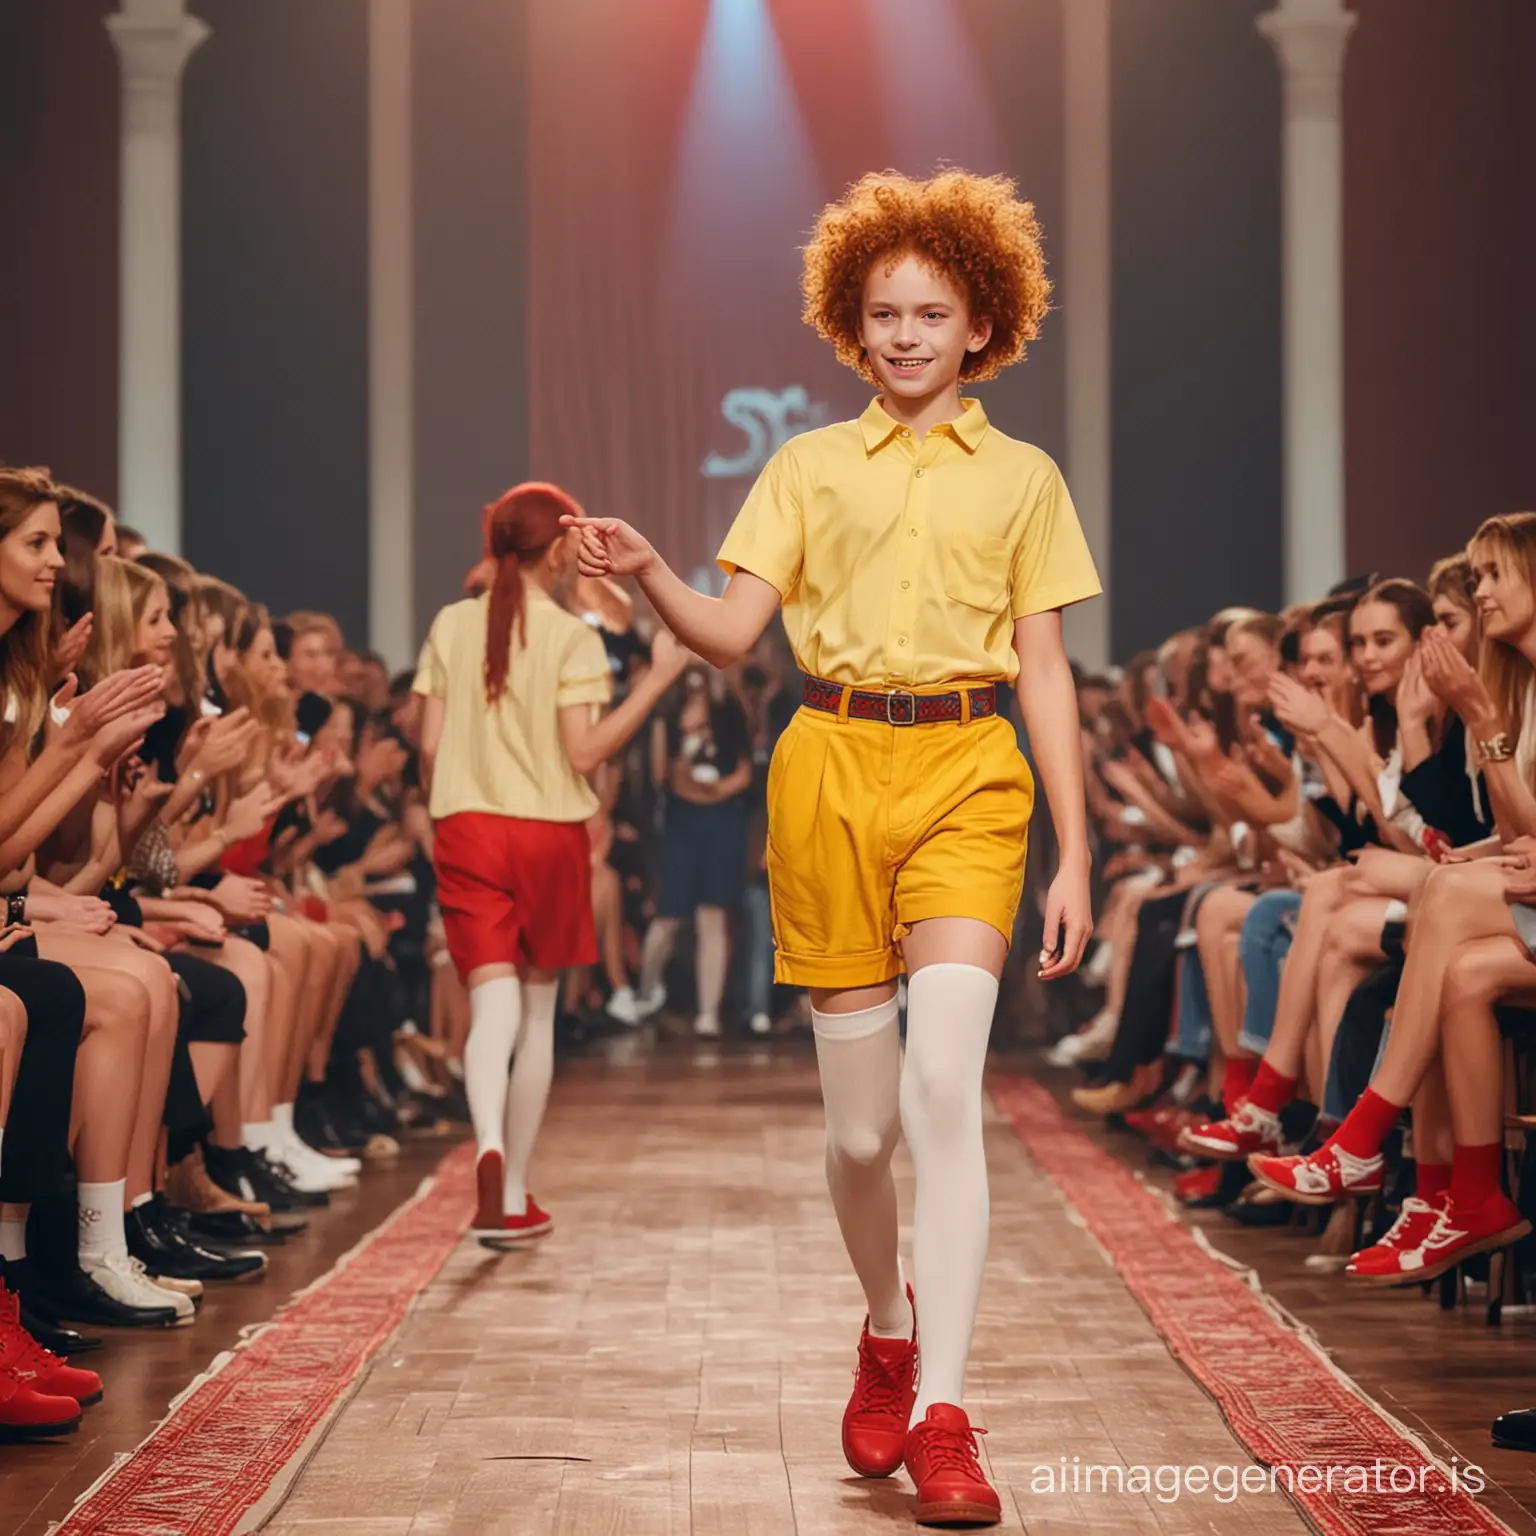 Fashion-Show-Runway-Stylish-13YearOld-Model-and-Enthusiastic-Audience